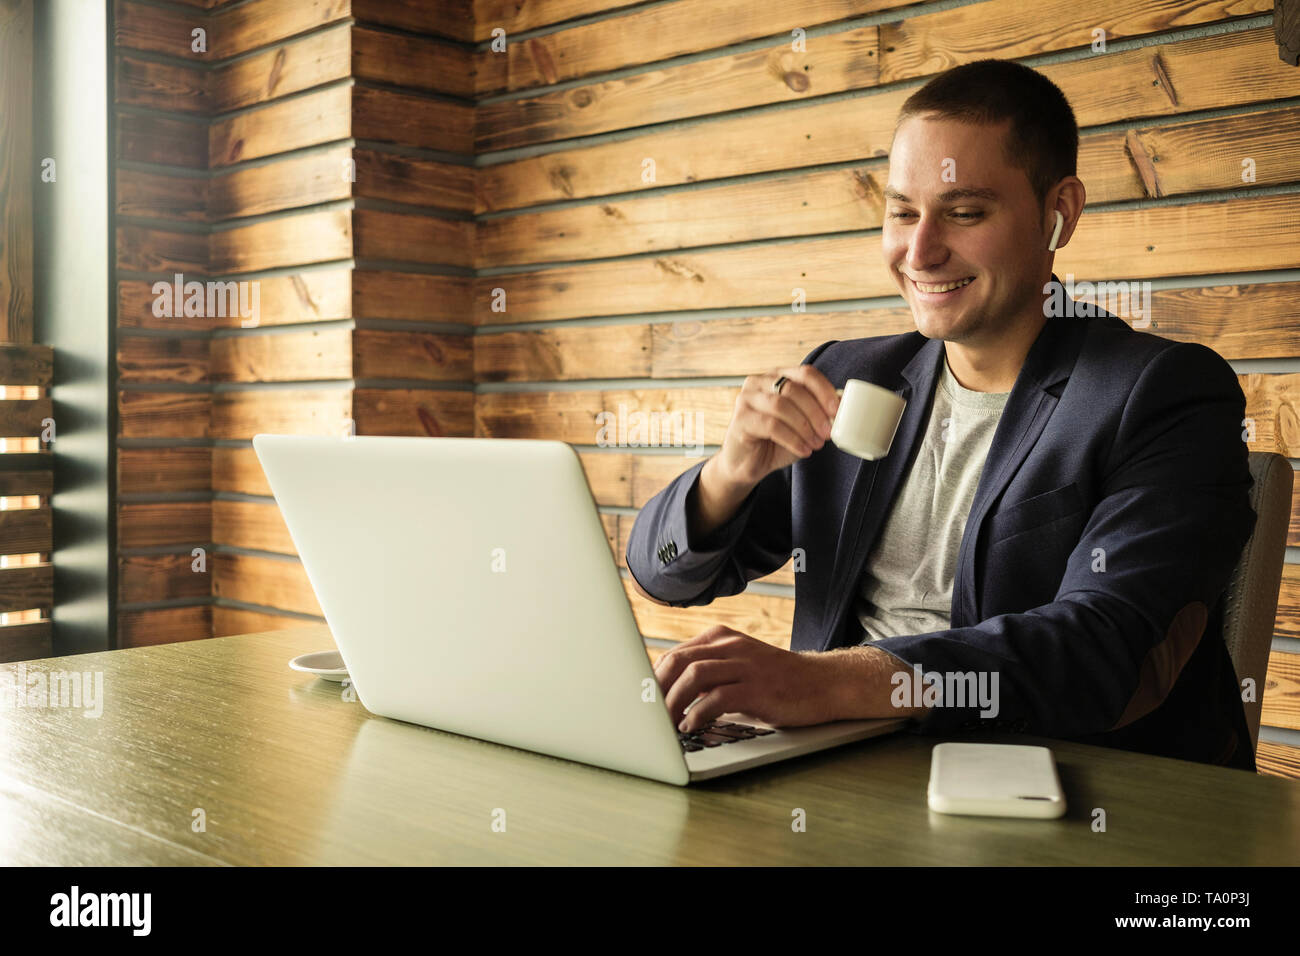 Smiling successful businessman drinking coffee in the office as he browses on an open laptop while wearing an audio earbud Stock Photo